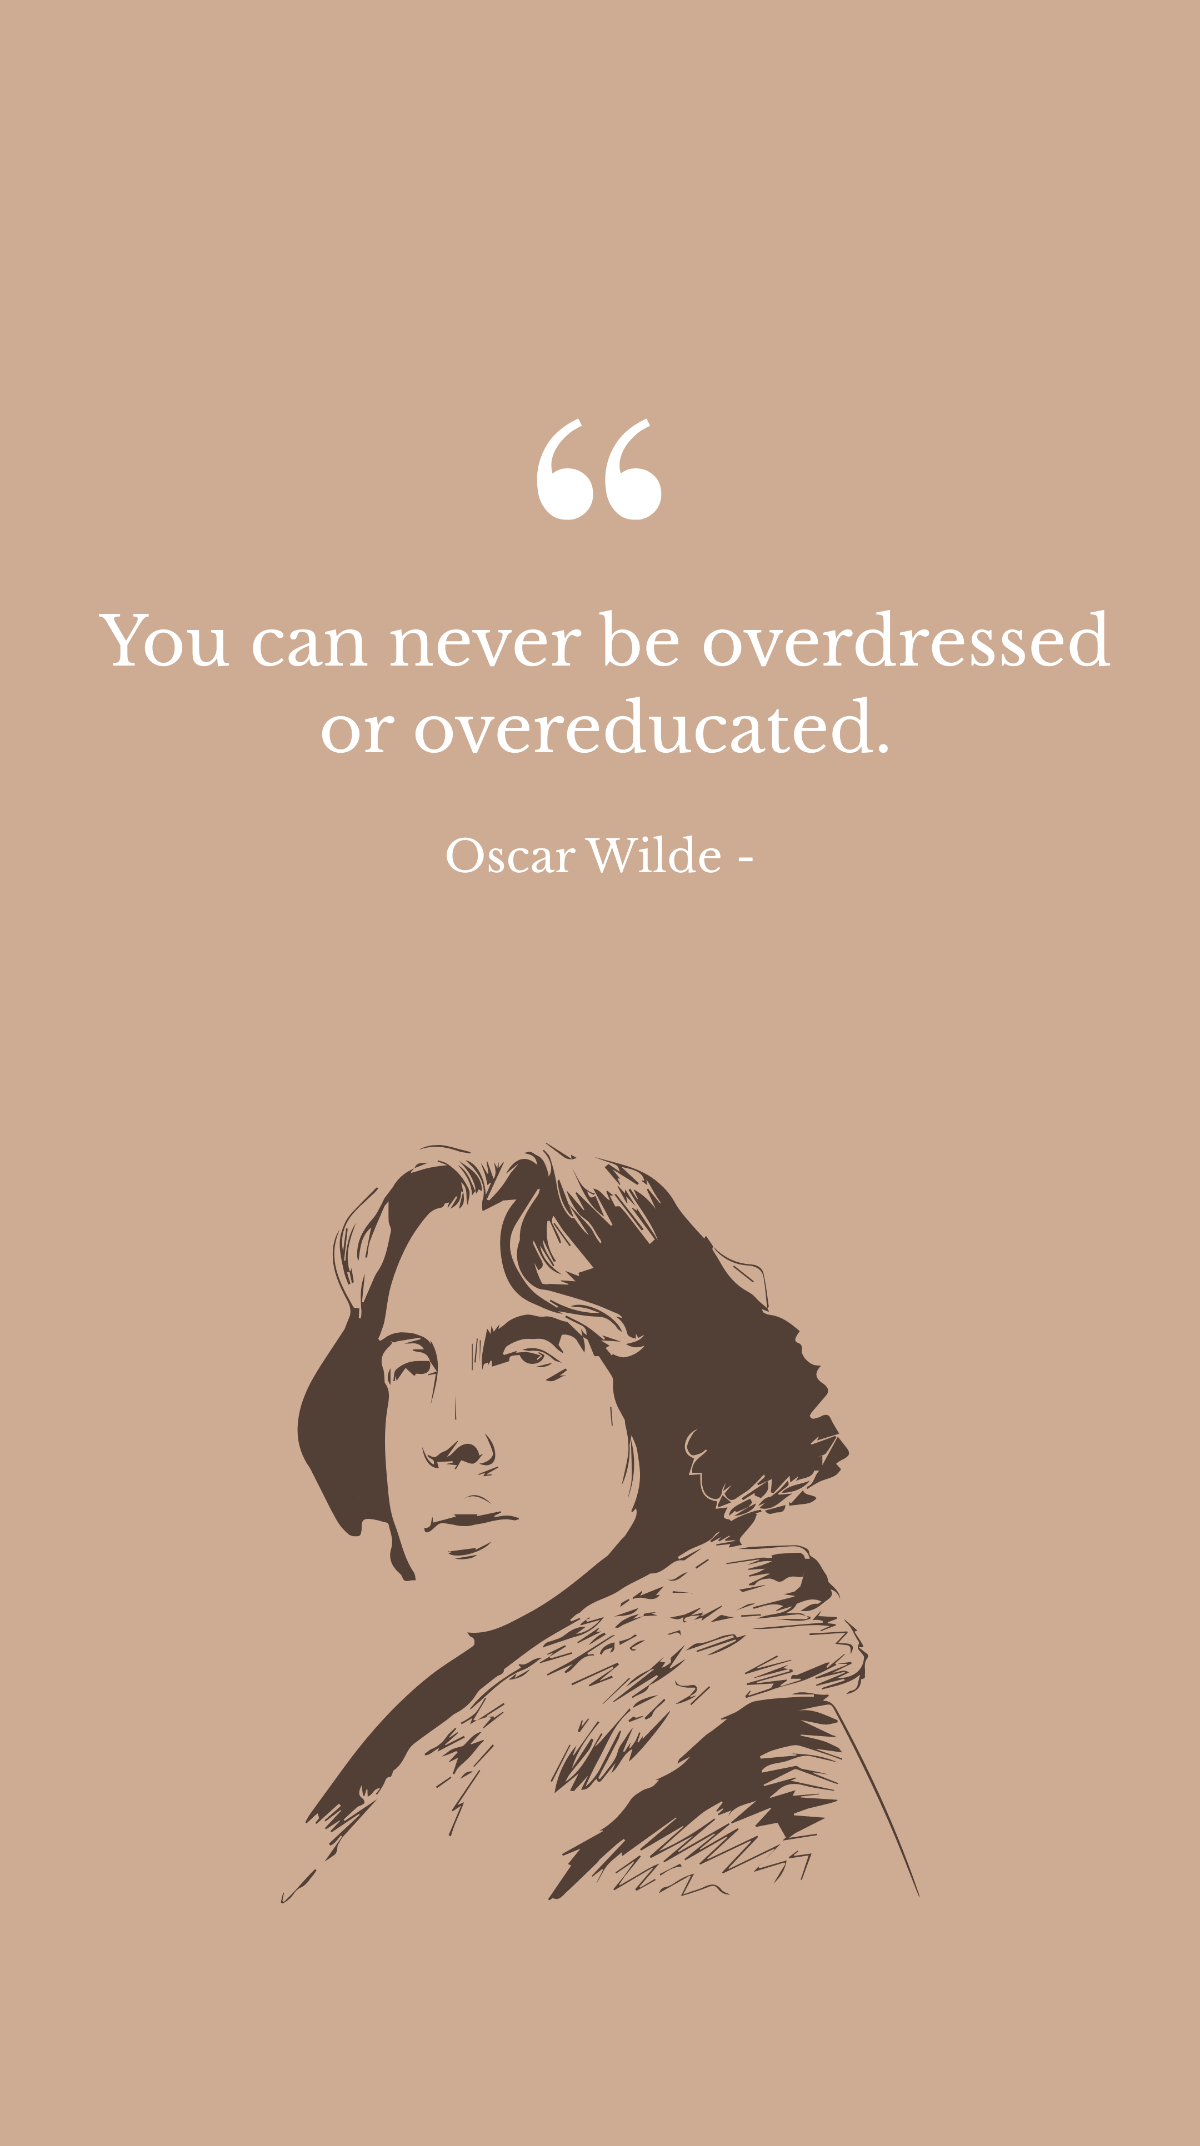 Free Oscar Wilde - You can never be overdressed or overeducated. Template